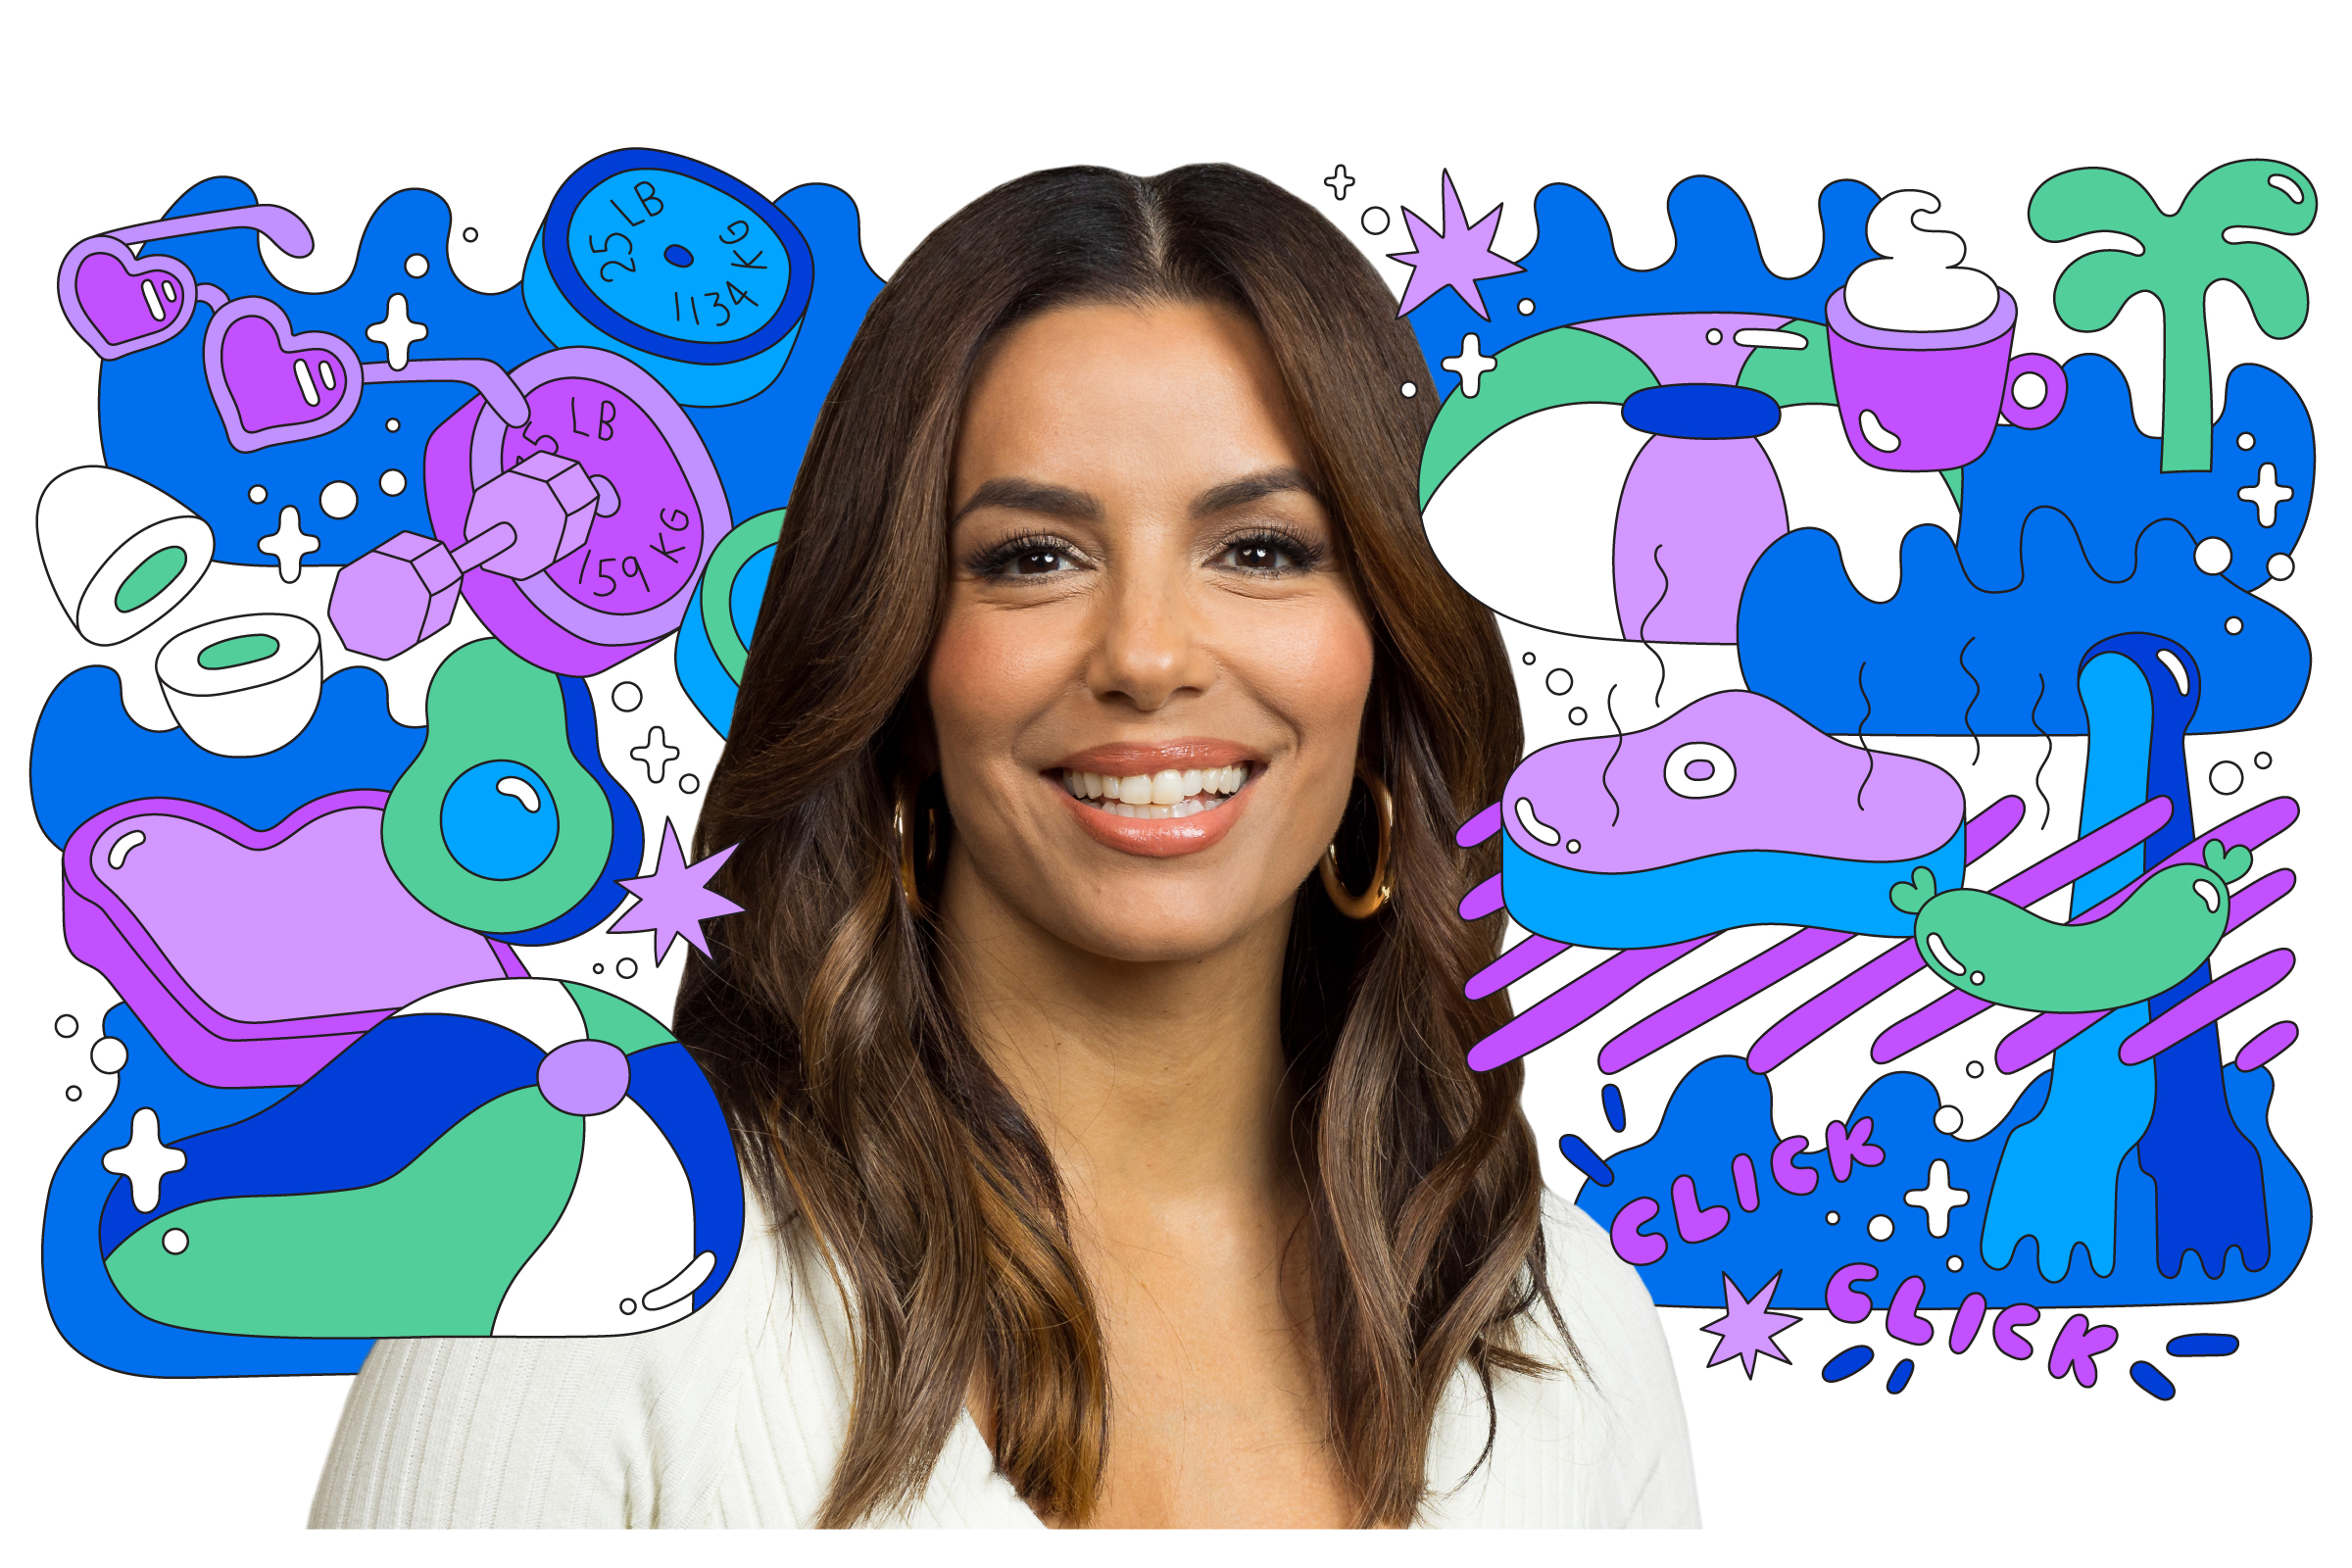 Photo illustration of Eva Longoria surrounded by illustrated elements like a sizzling steak, beach ball, sunglasses and waves